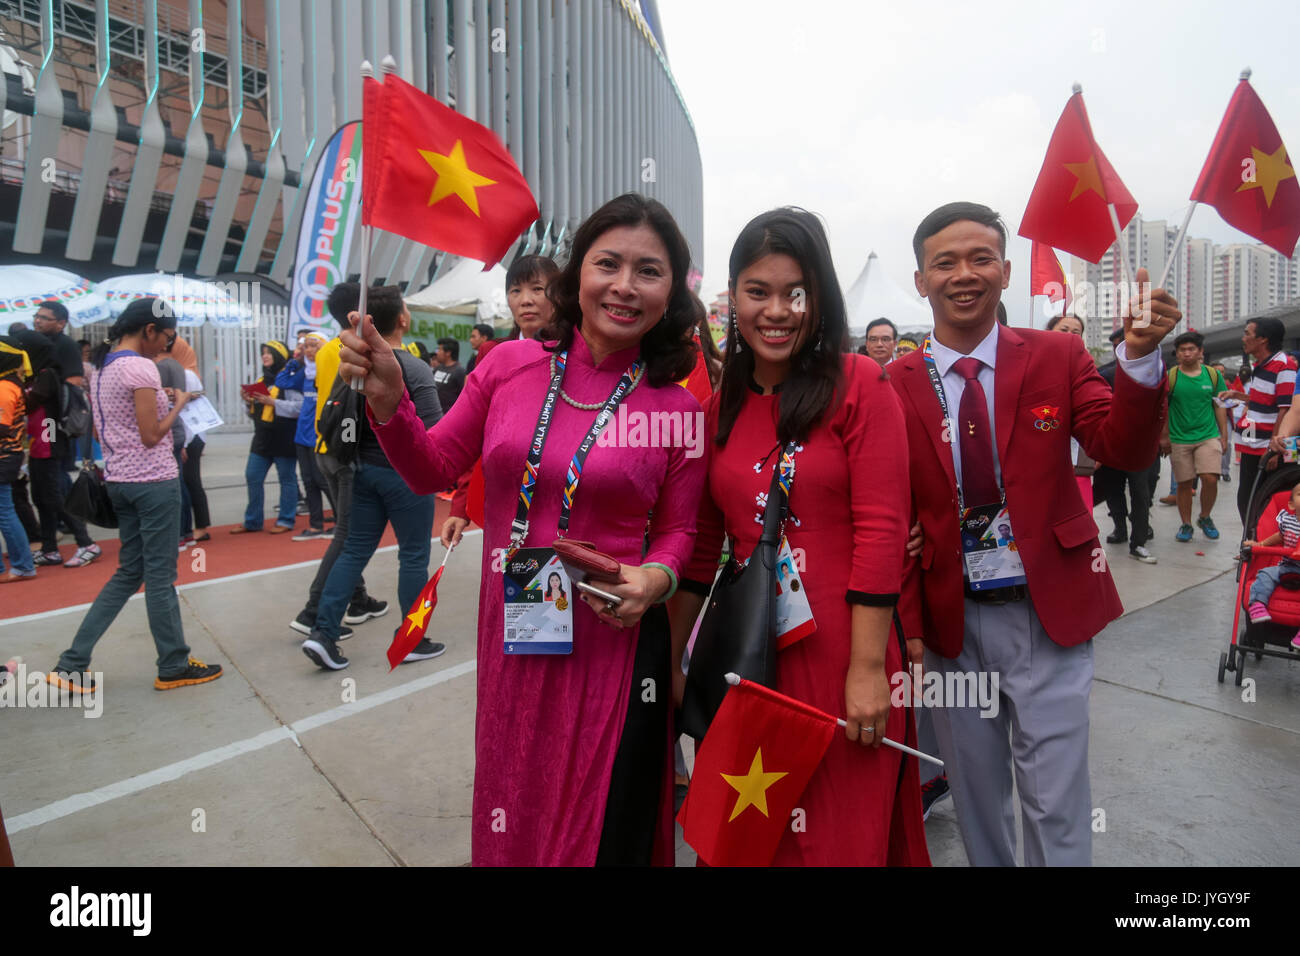 Vietnam officer Nguyen Kim Lan and her colleague s outside the national stadium during the opening ceremony of 29th SEA games. Credit: Calvin Chan/Alamy Live News Stock Photo